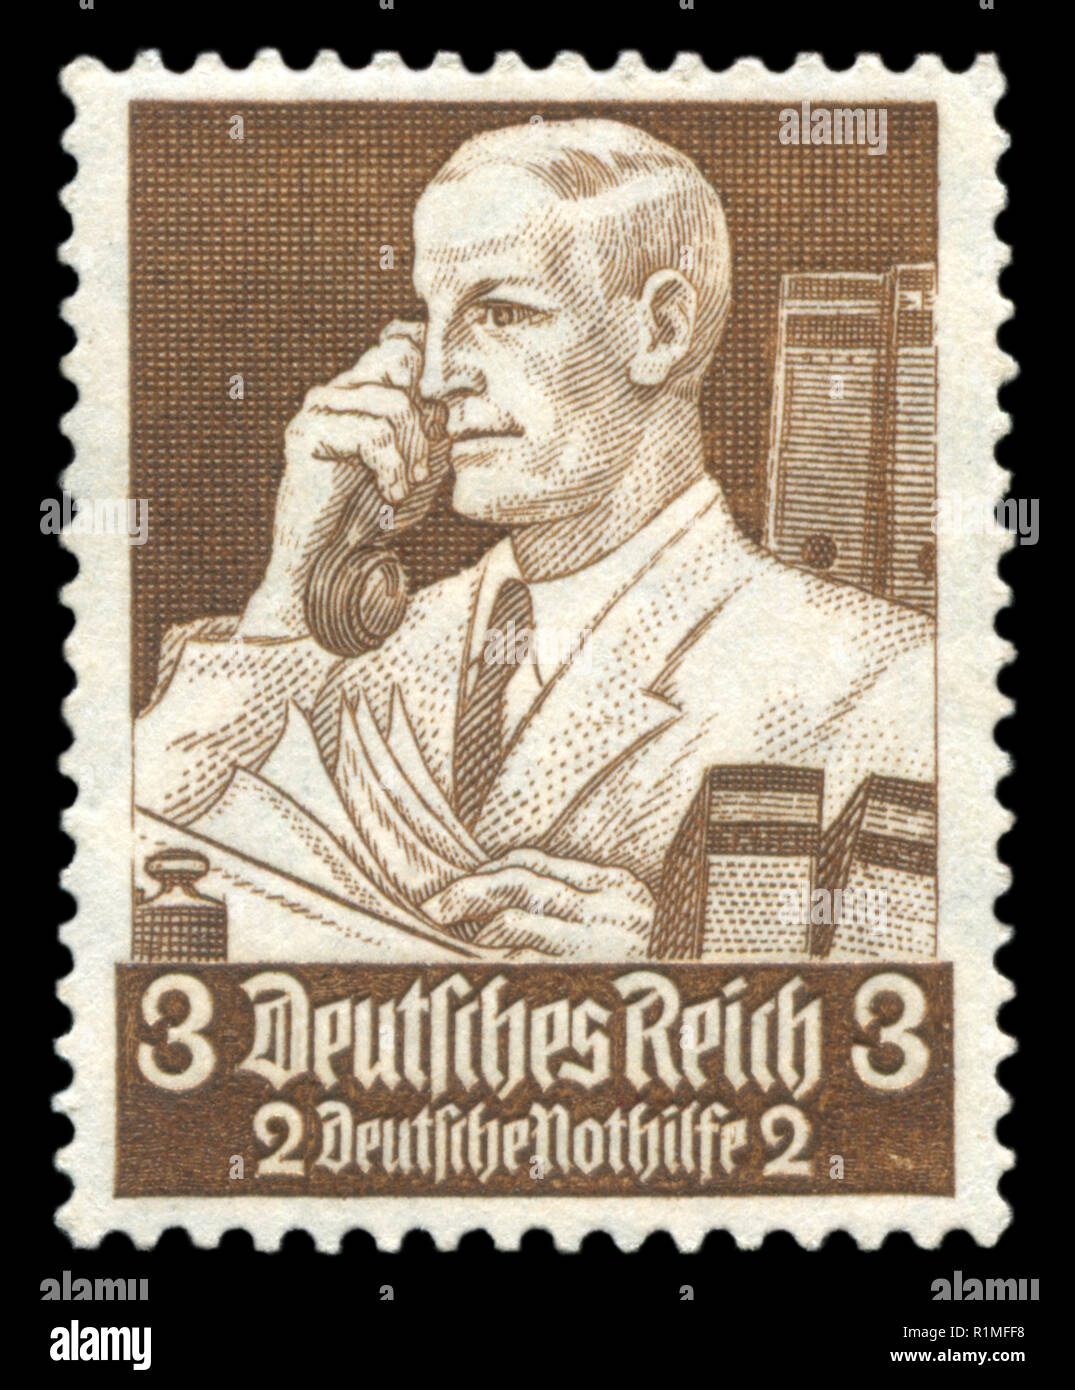 German historical postage stamp: Businessman with phone. Emergency assistance Fund. Honourable professions, 1934, Germany, the Third Reich Stock Photo